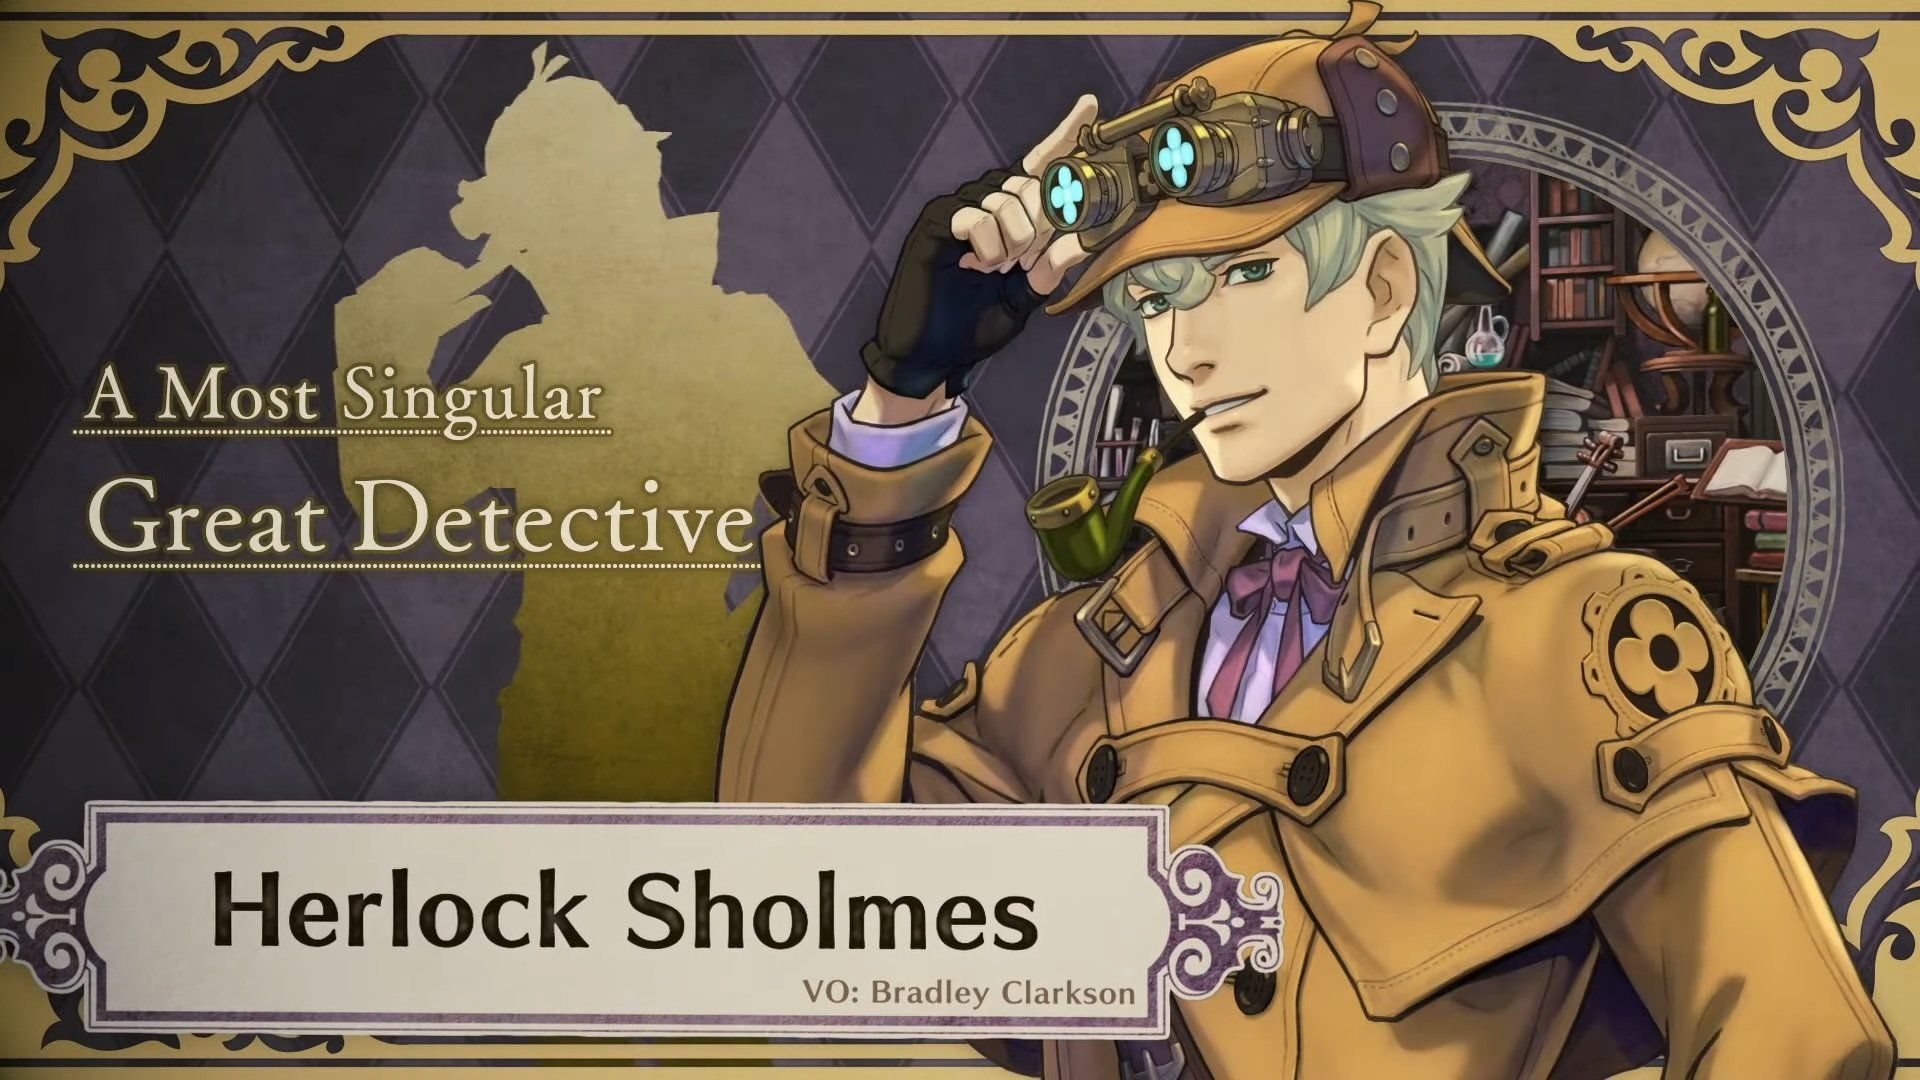 Sherlock Holmes in Ace Attorney? The Great Ace Attorney Chronicles Revealed With Dual Audio